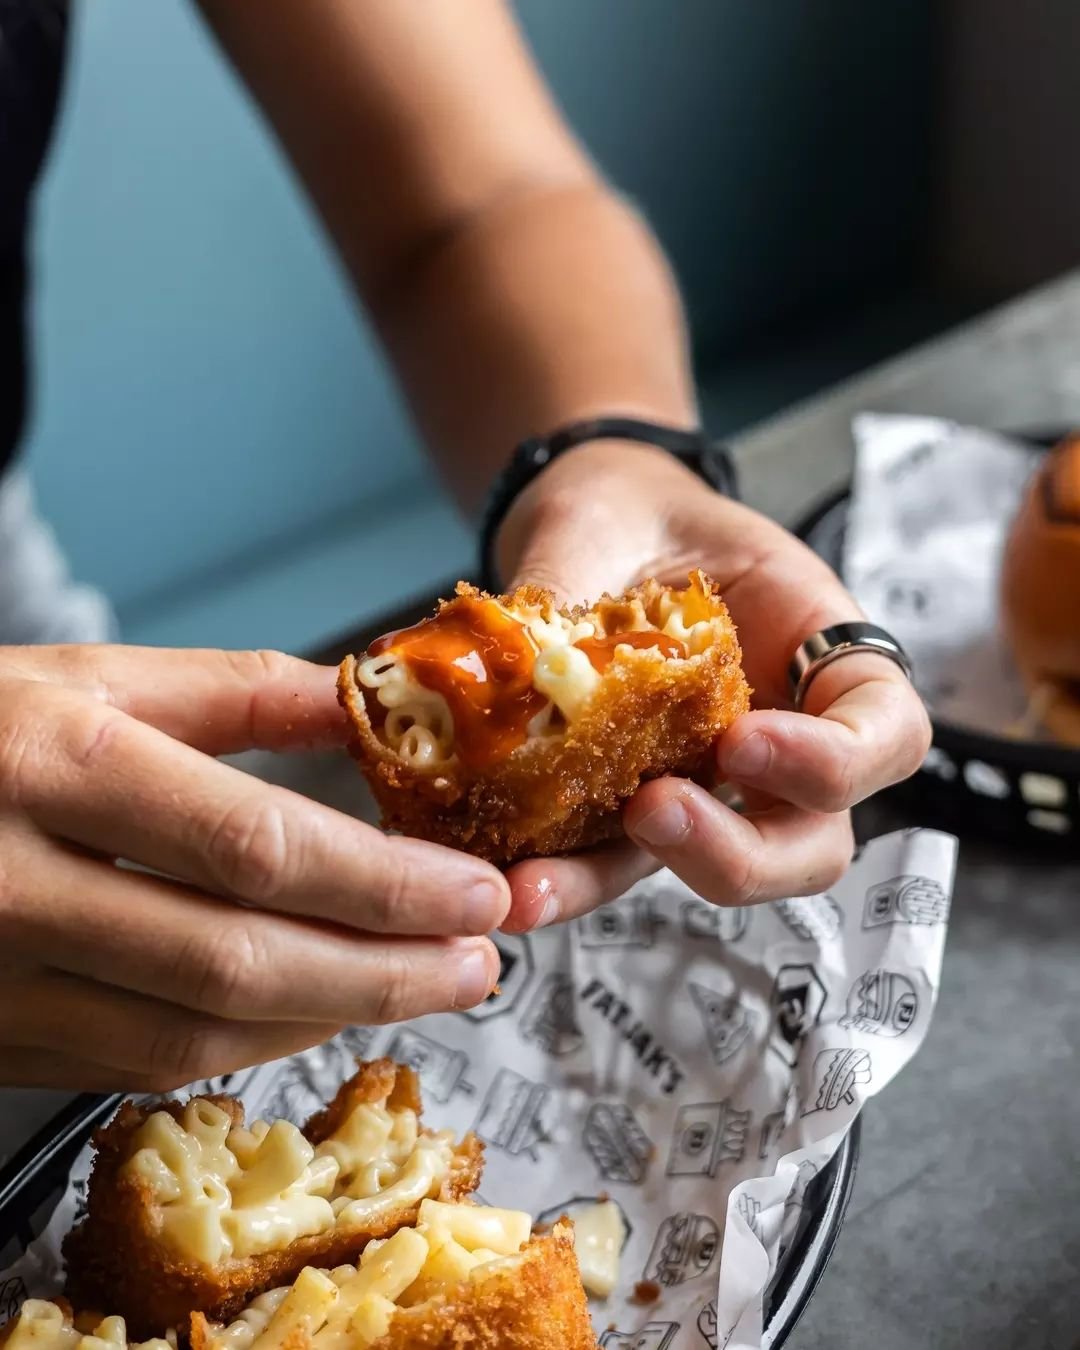 Slather on sauce and delve into our of our Mac and Cheese Bites!

Don't worry they won't bite back&nbsp;😂